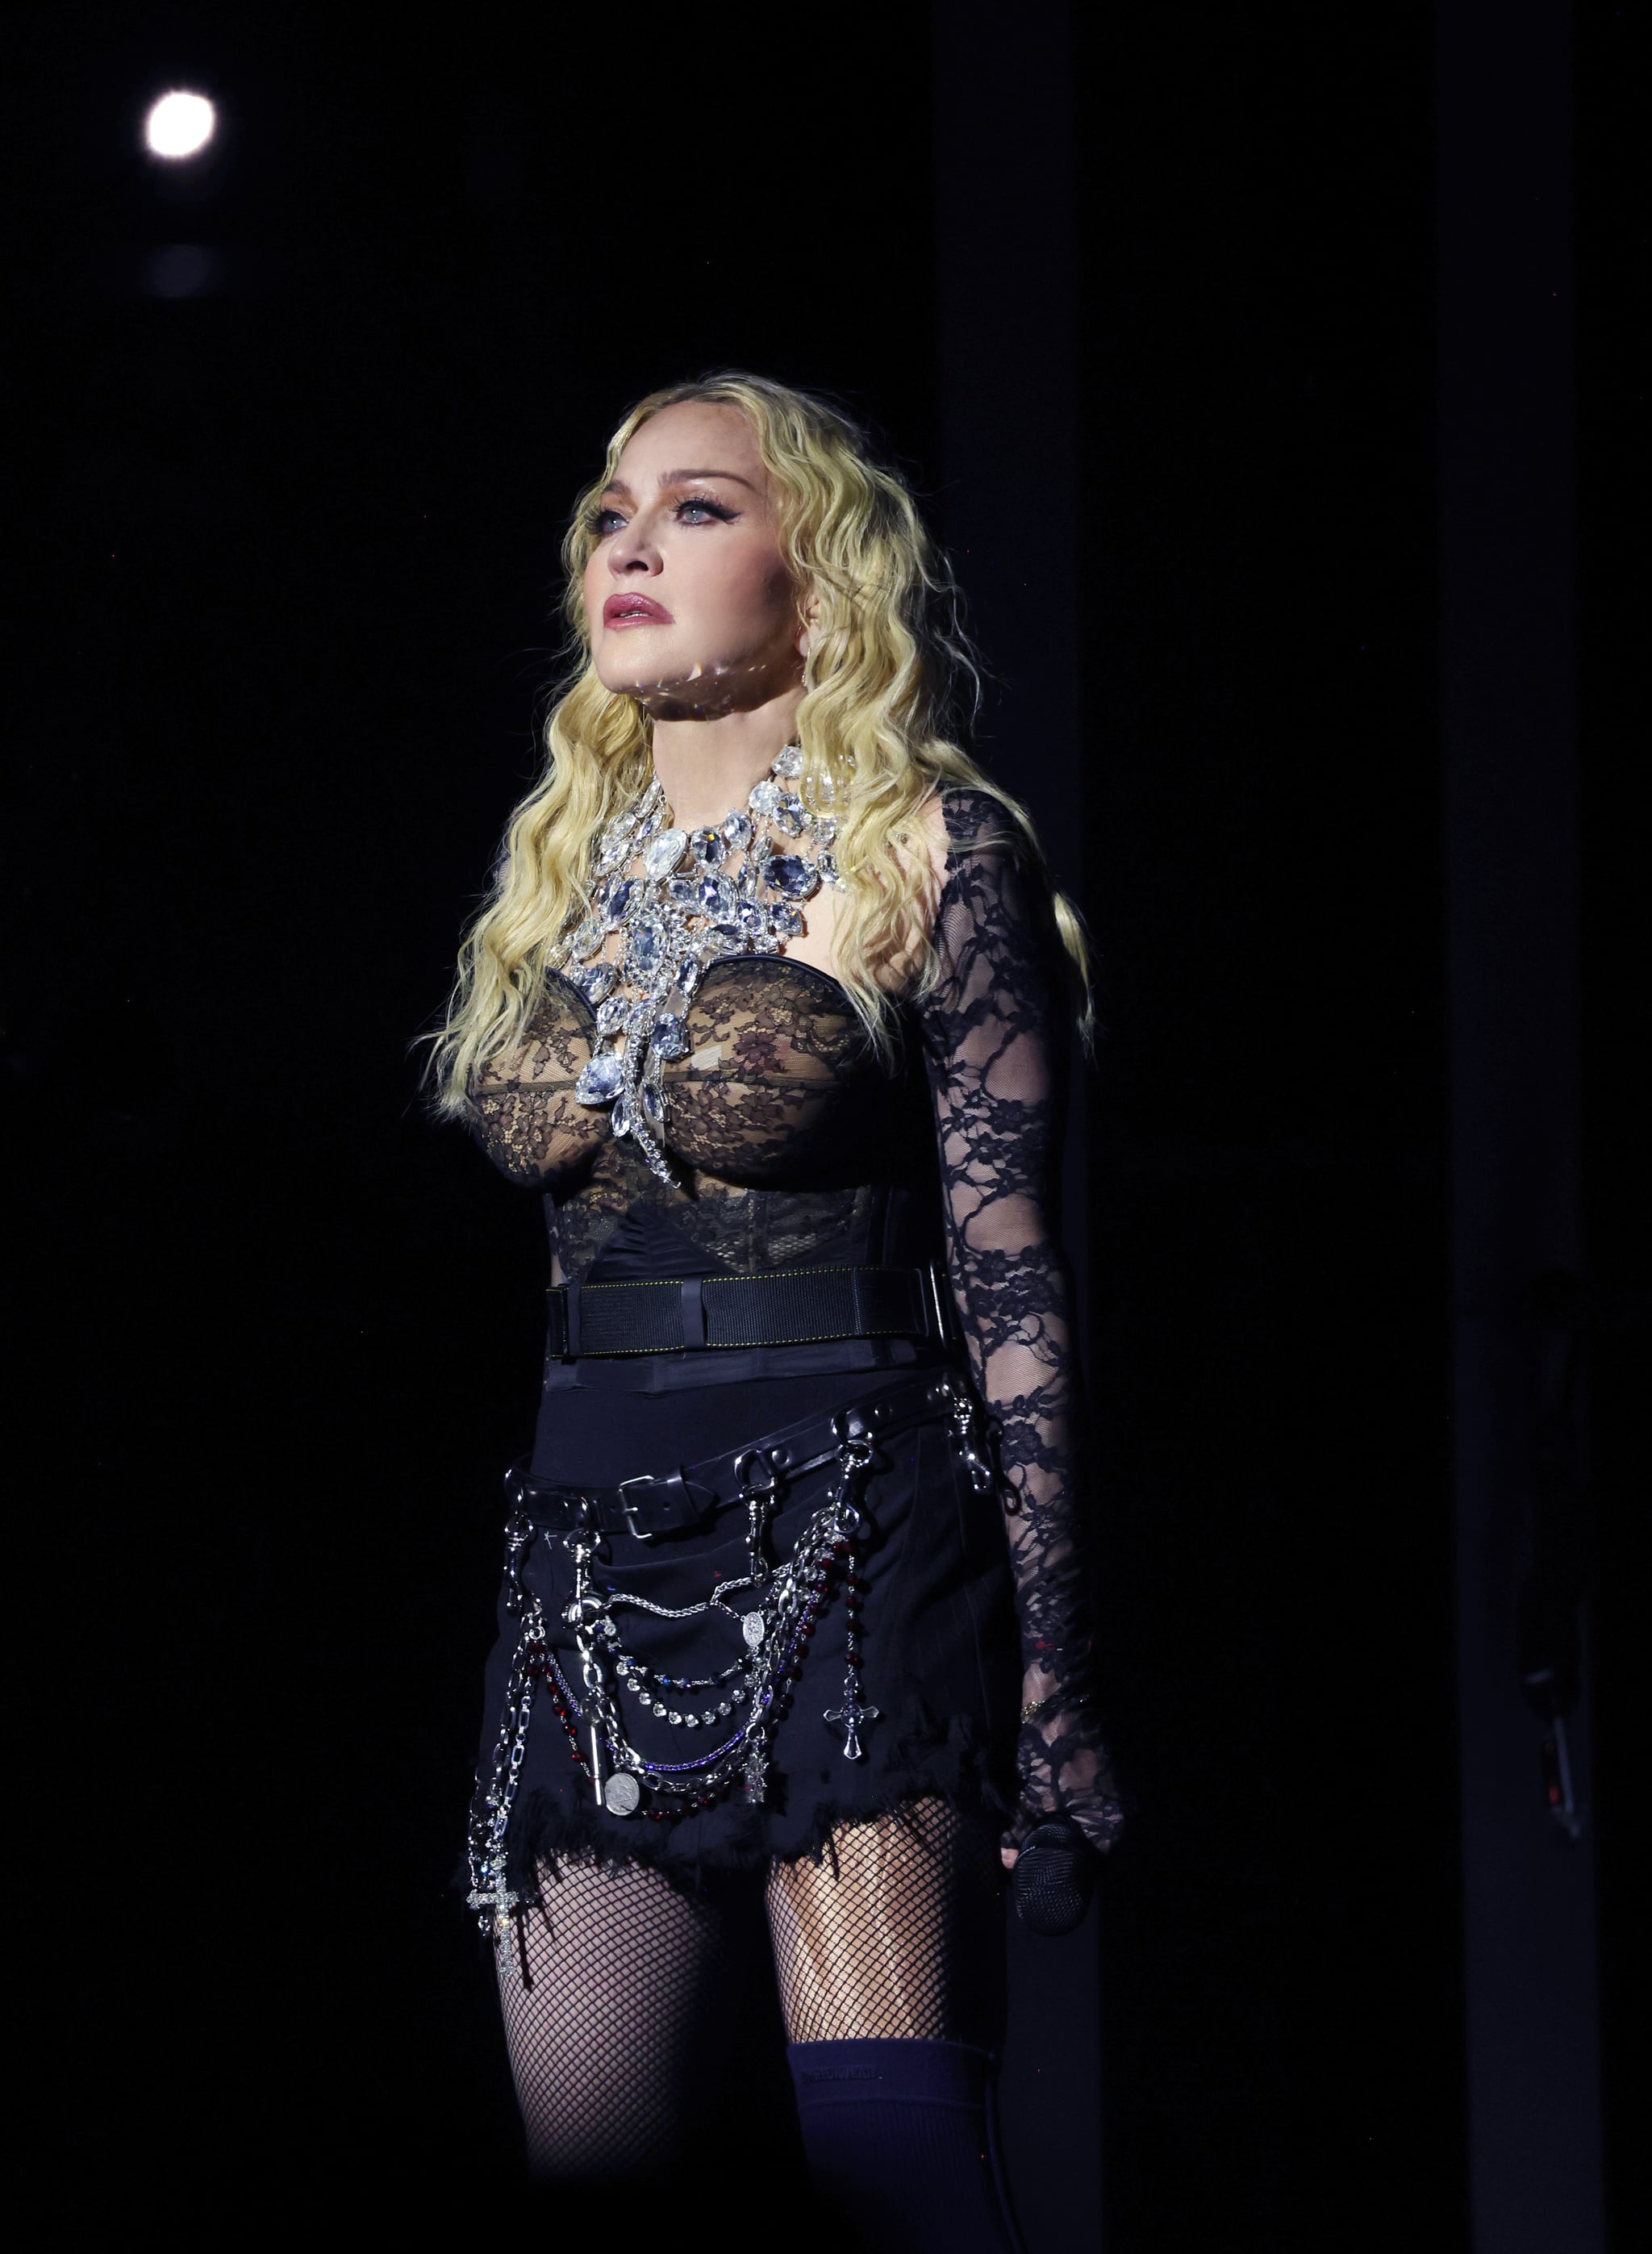 LONDON, ENGLAND - OCTOBER 15: (Exclusive Coverage) Madonna performs during The Celebration Tour at The O2 Arena on October 15, 2023 in London, England. (Photo by Kevin Mazur/WireImage for Live Nation)